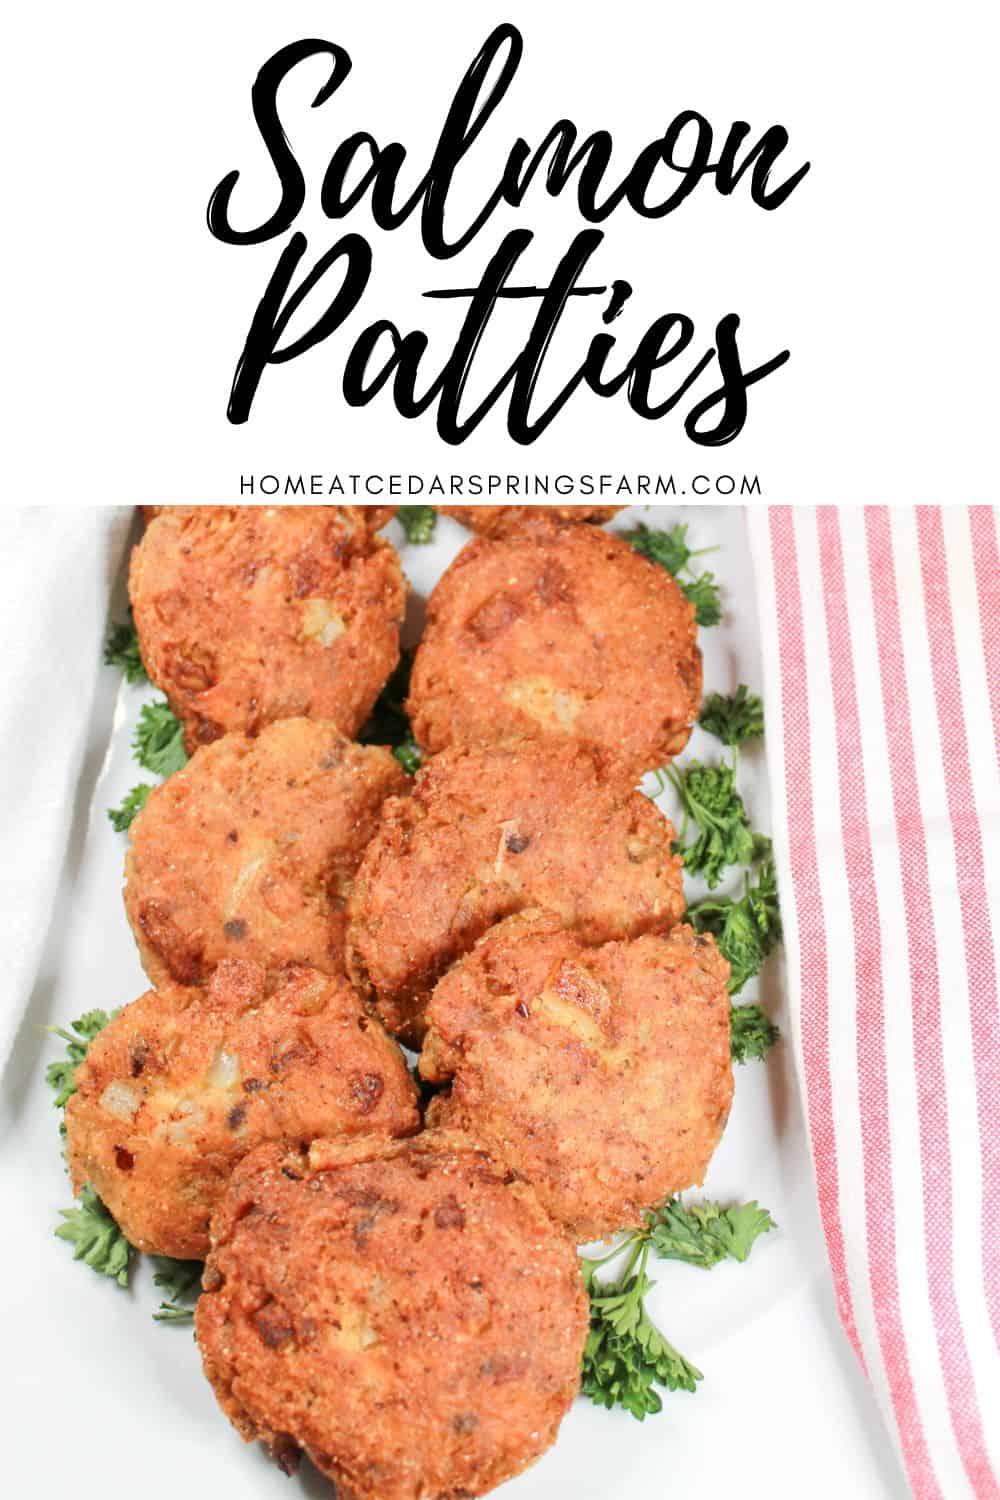 Salmon Patties on a white plate with text overlay.